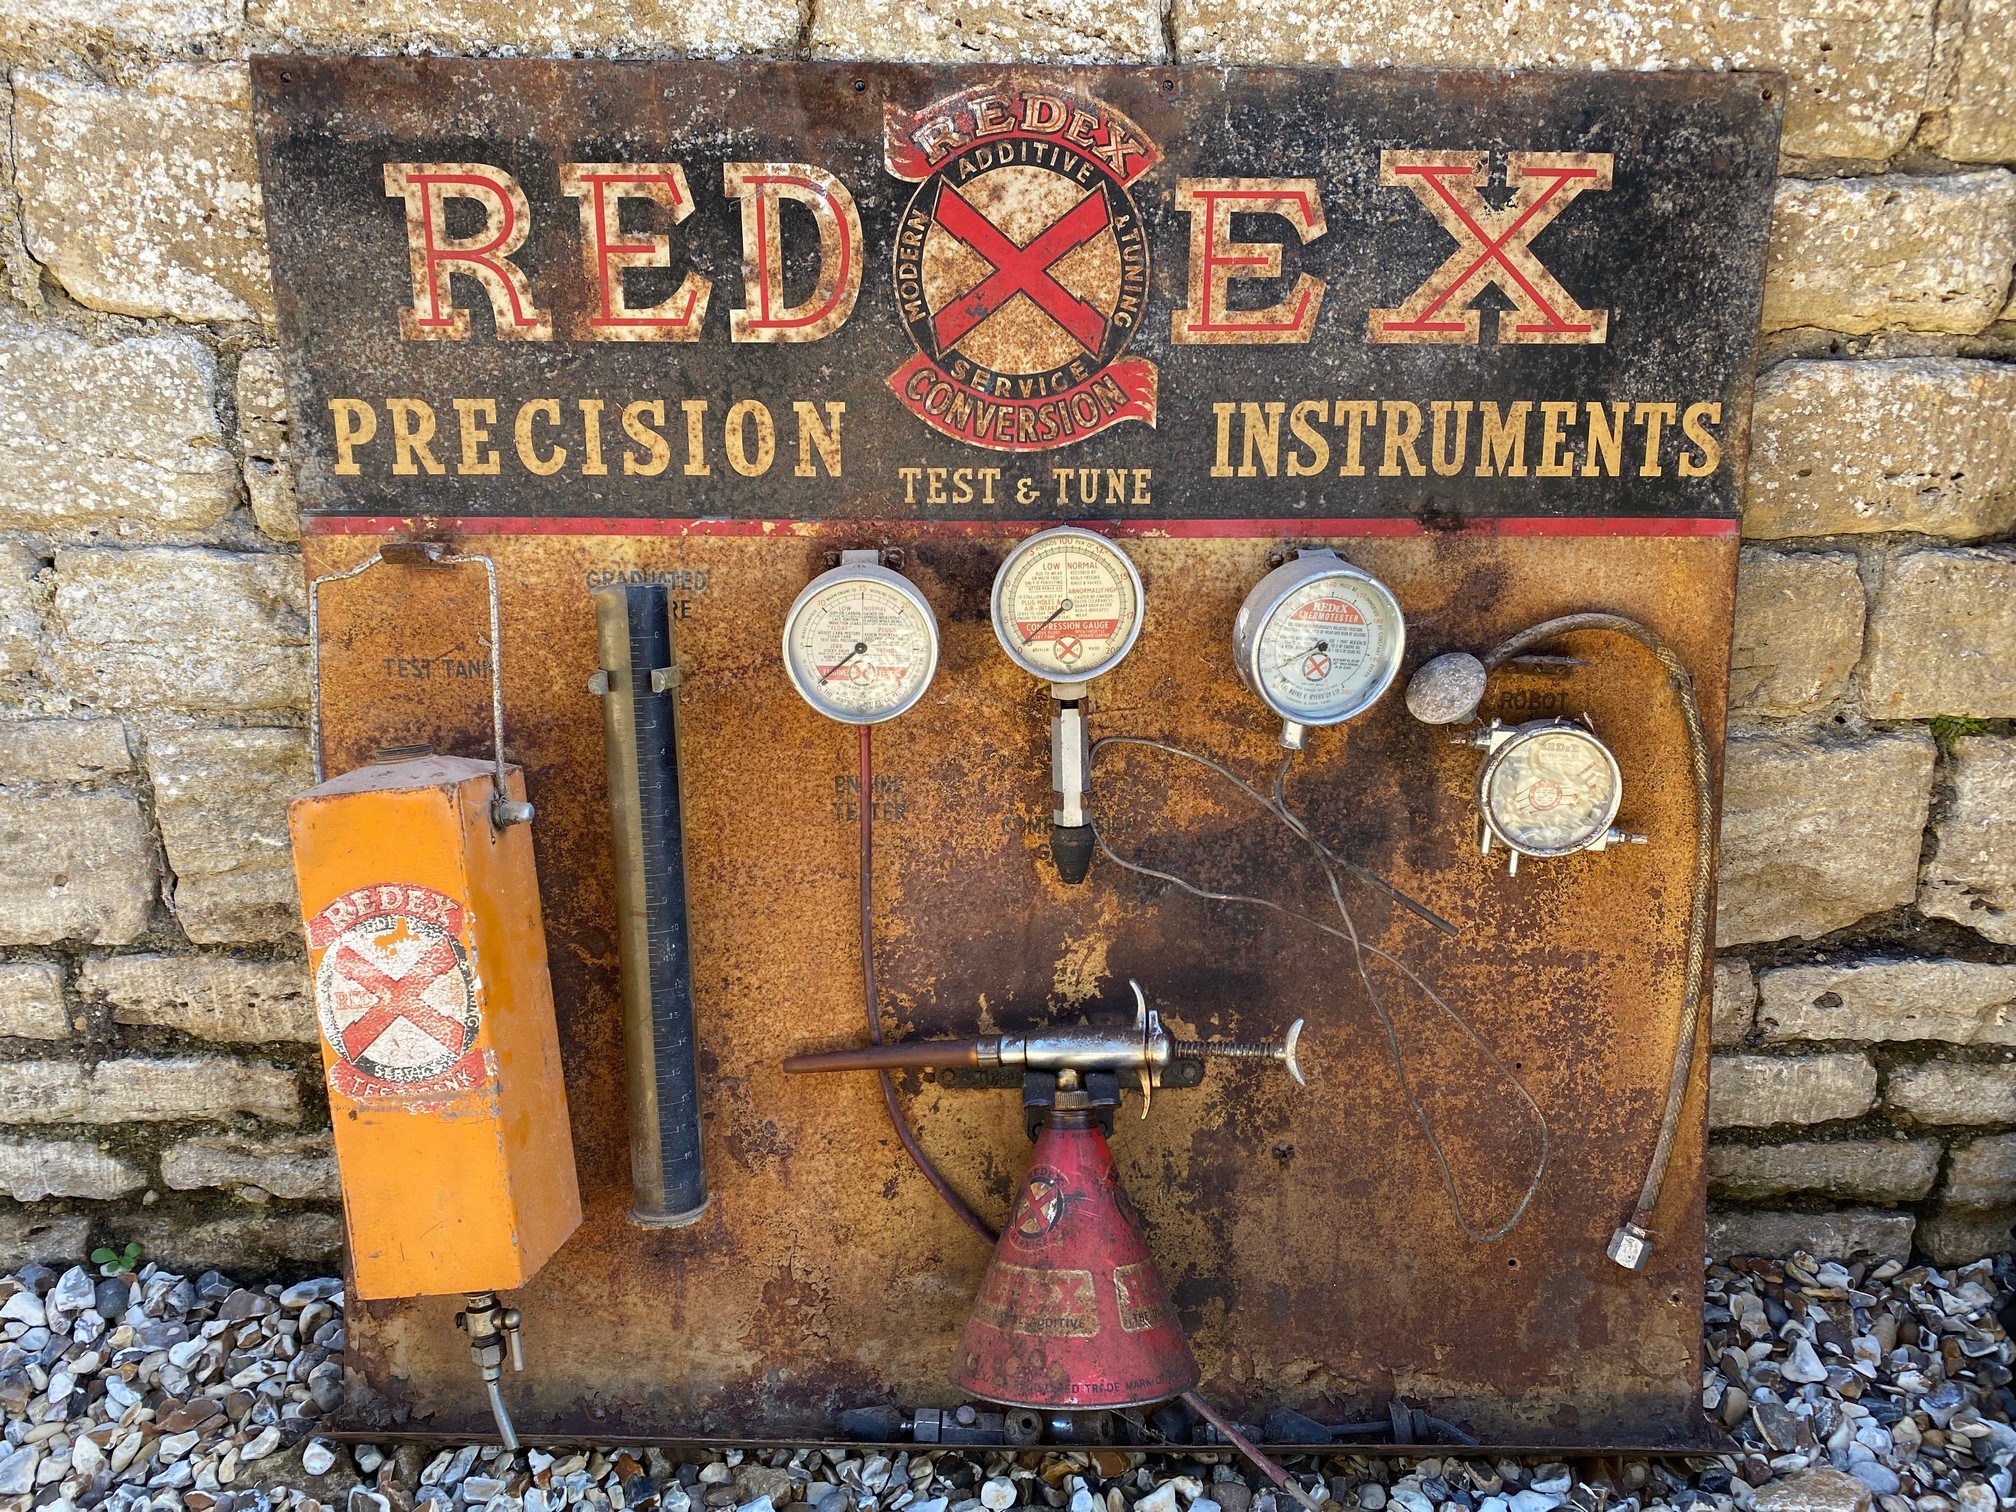 A Redex Precision Instruments garage display board, with various Redex equipment attached, 36 x